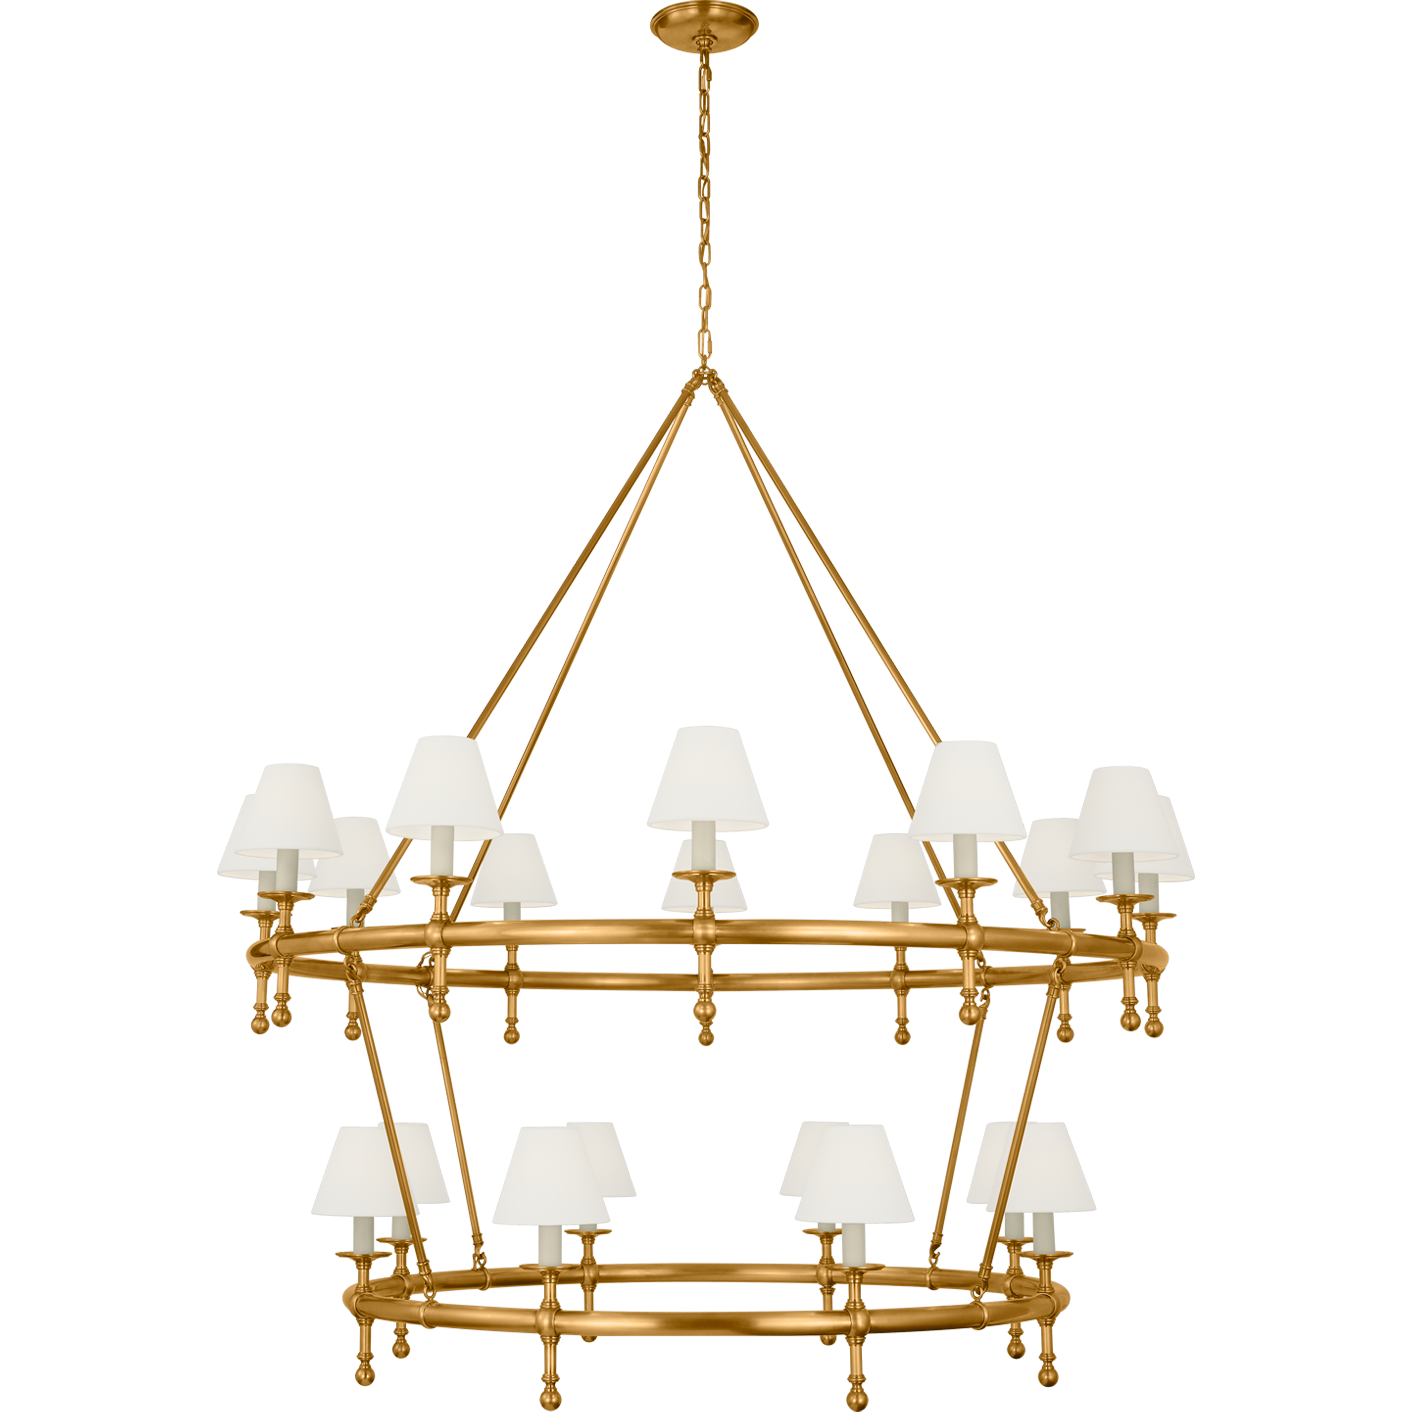 Classic 54" Two-Tier Ring Chandelier with Linen Shades